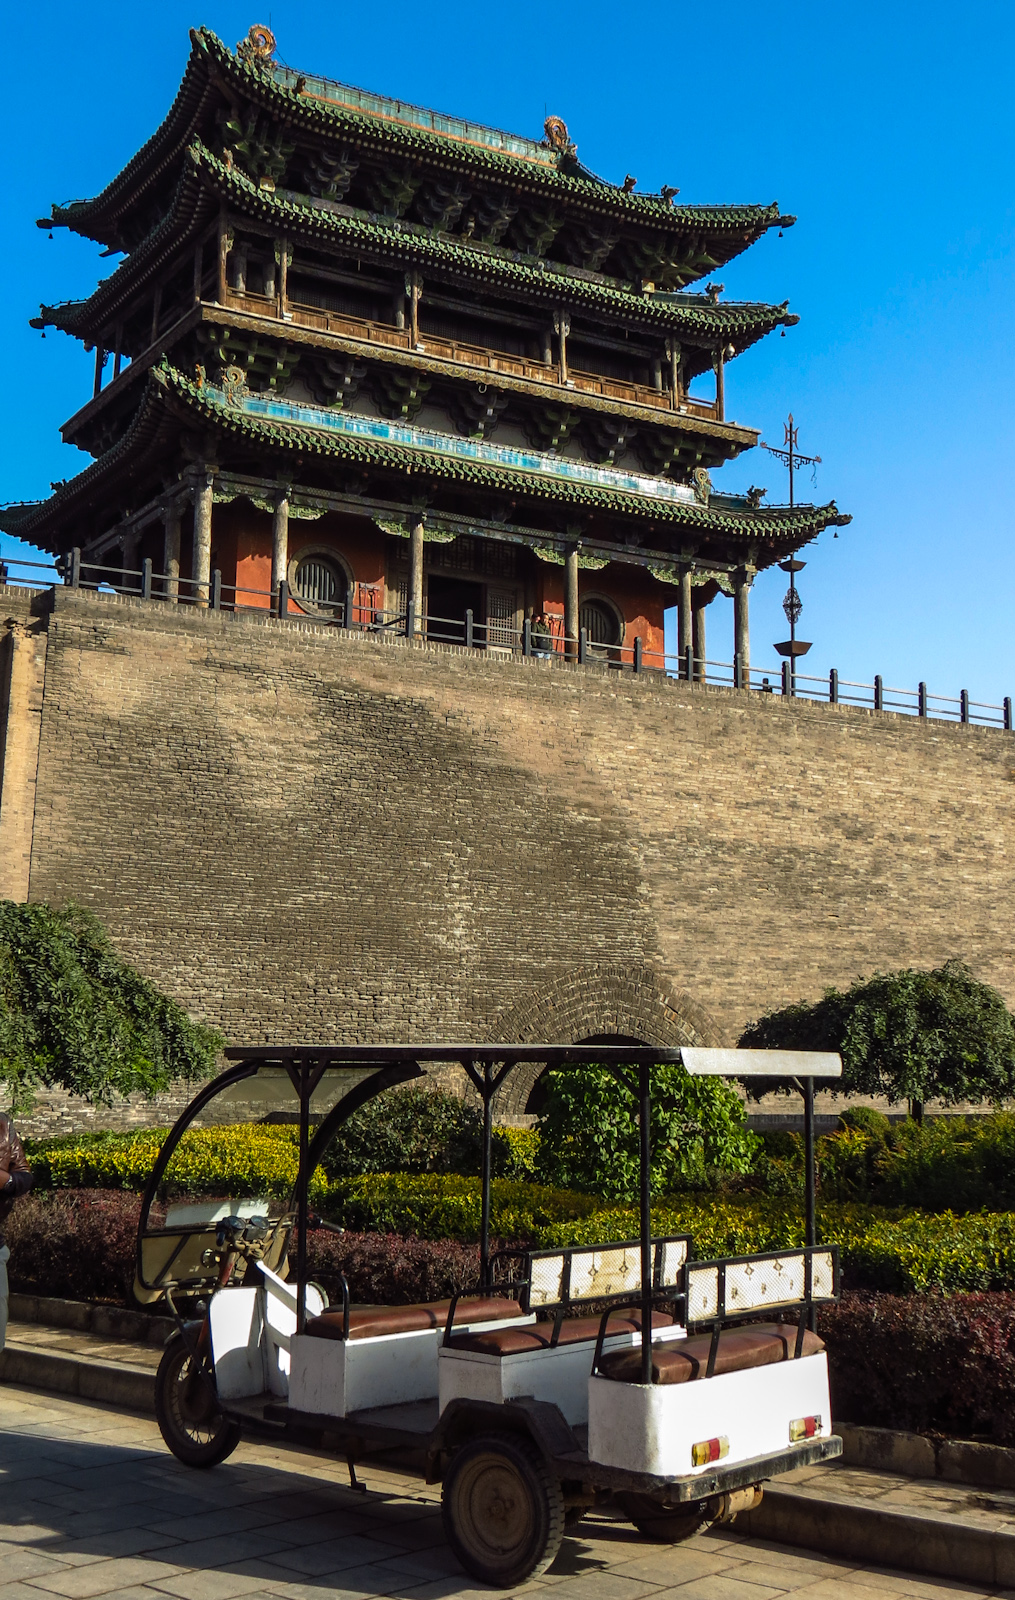 north-gate-pingyao-wall-with-electric-taxi